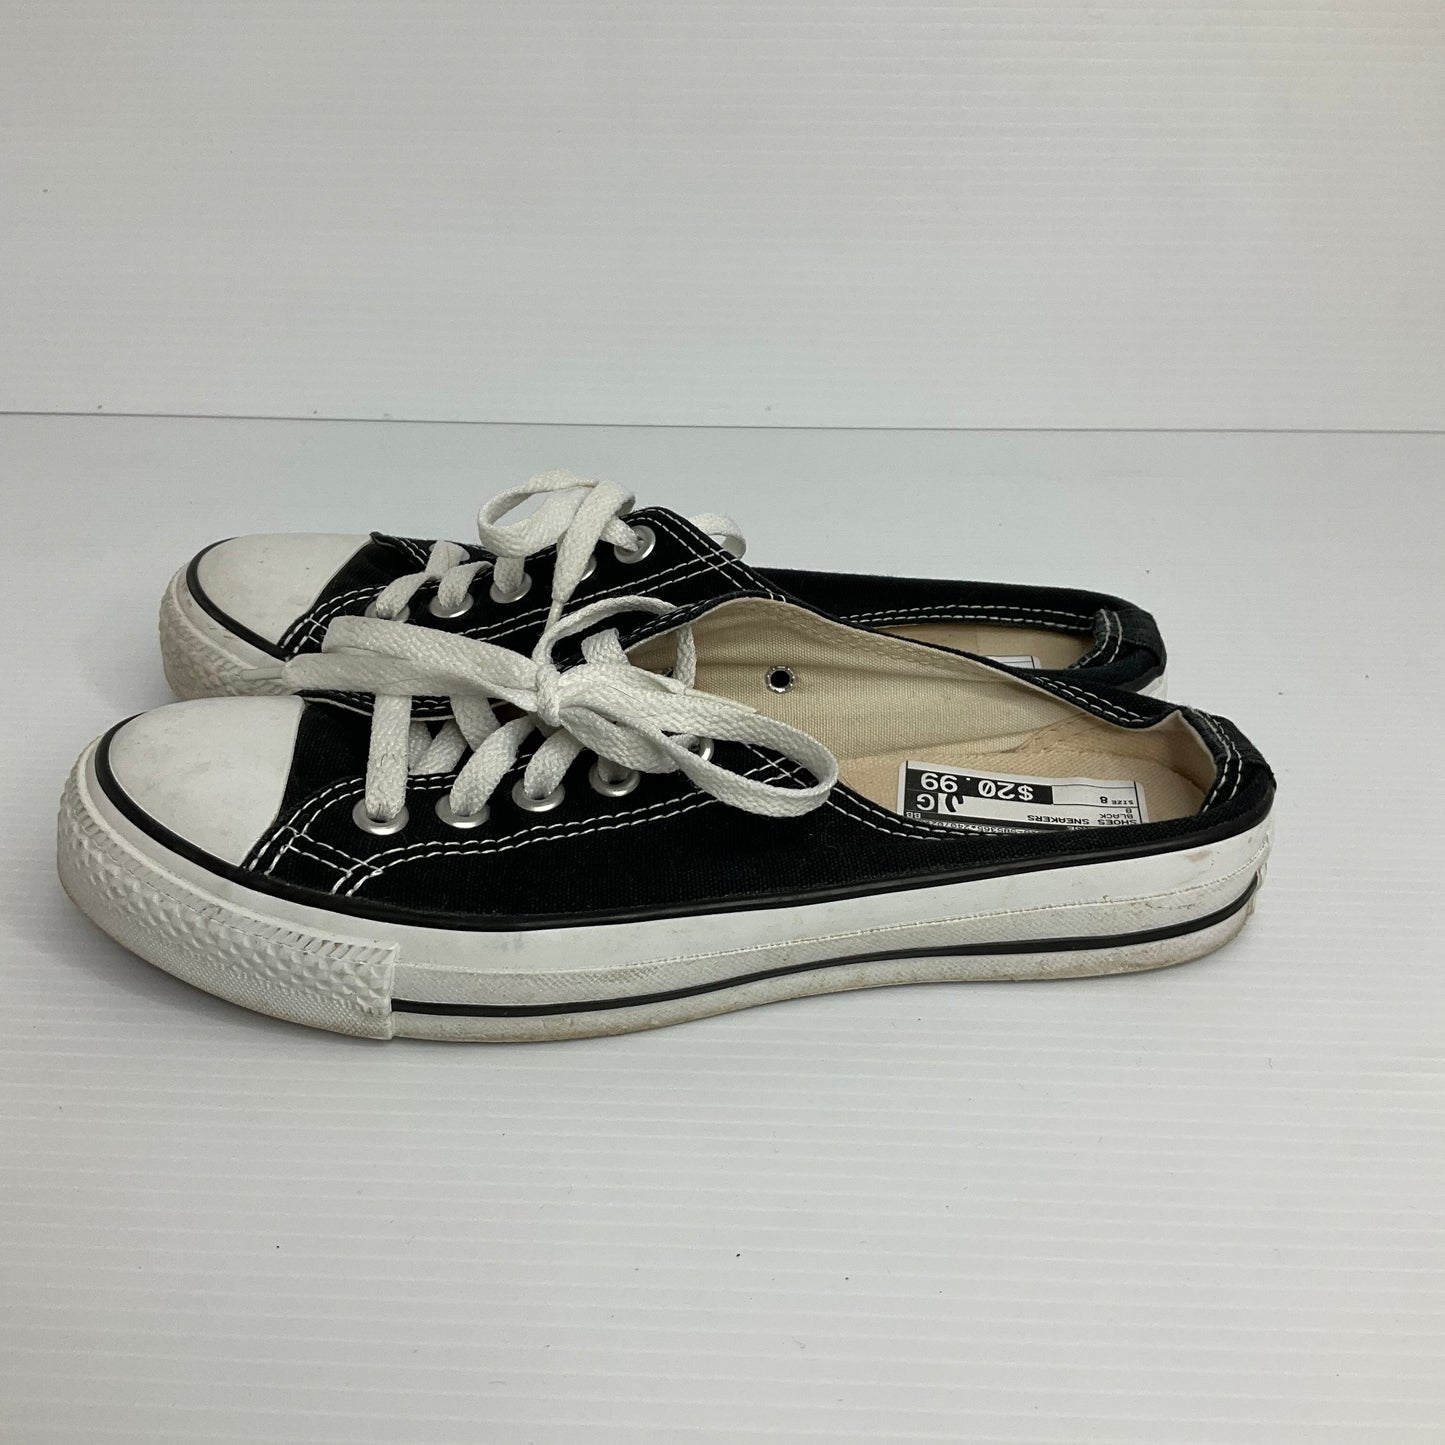 Black Shoes Sneakers Converse, Size 8